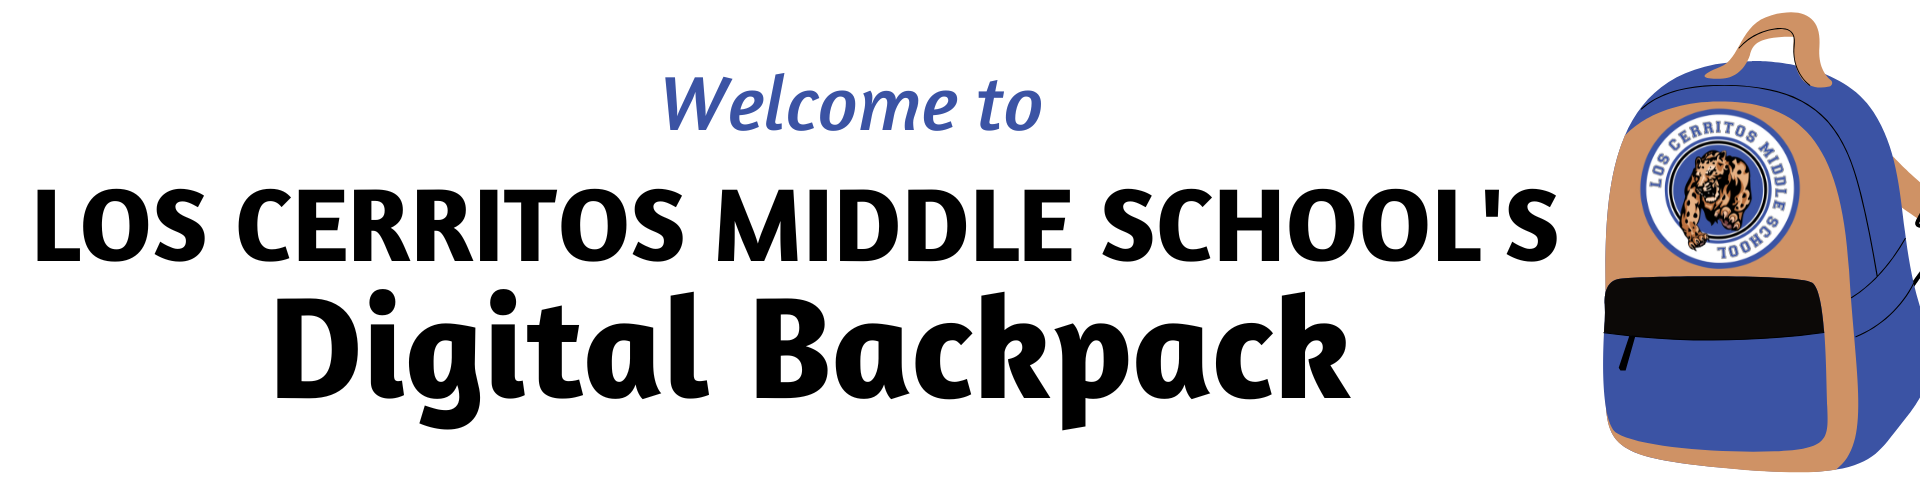 Welcome to Los Cerritos Middle School's Digital Backpack